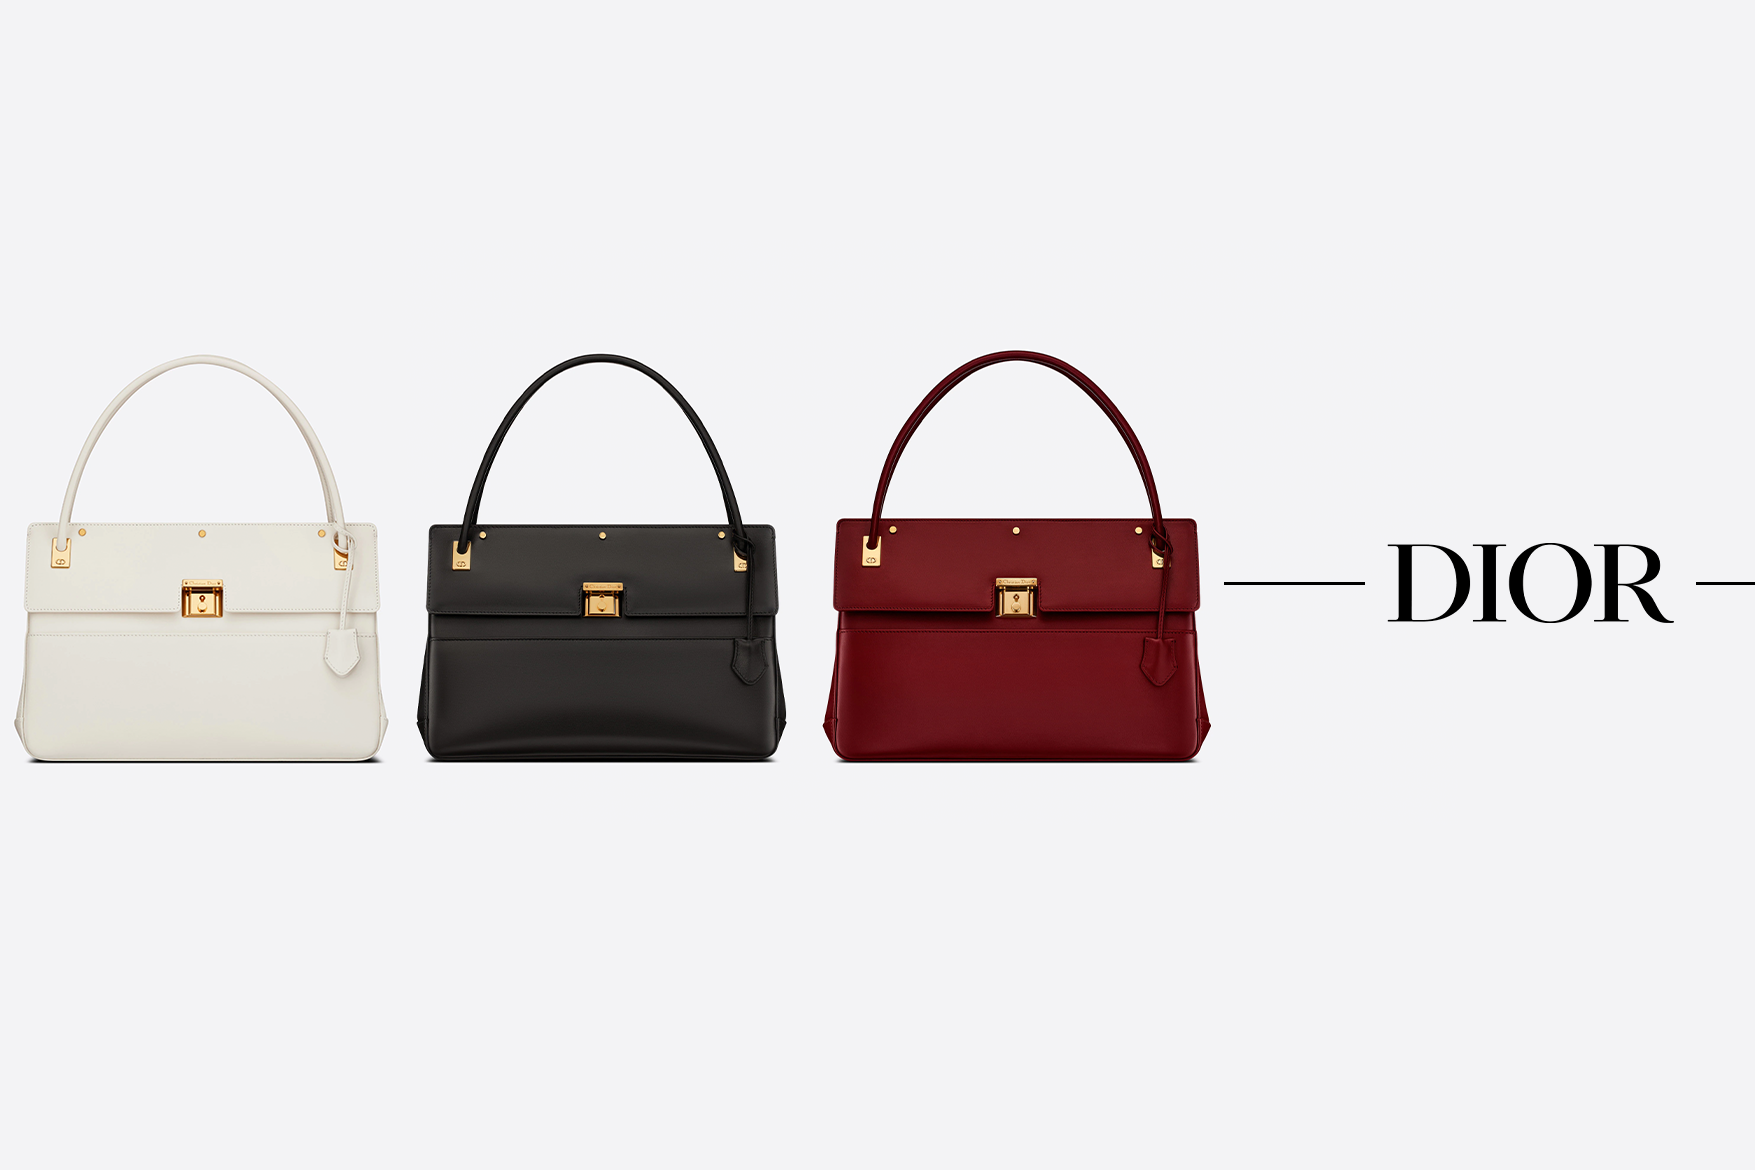 Dior-Parisienne-Bag-quietly-launched-at-website-01